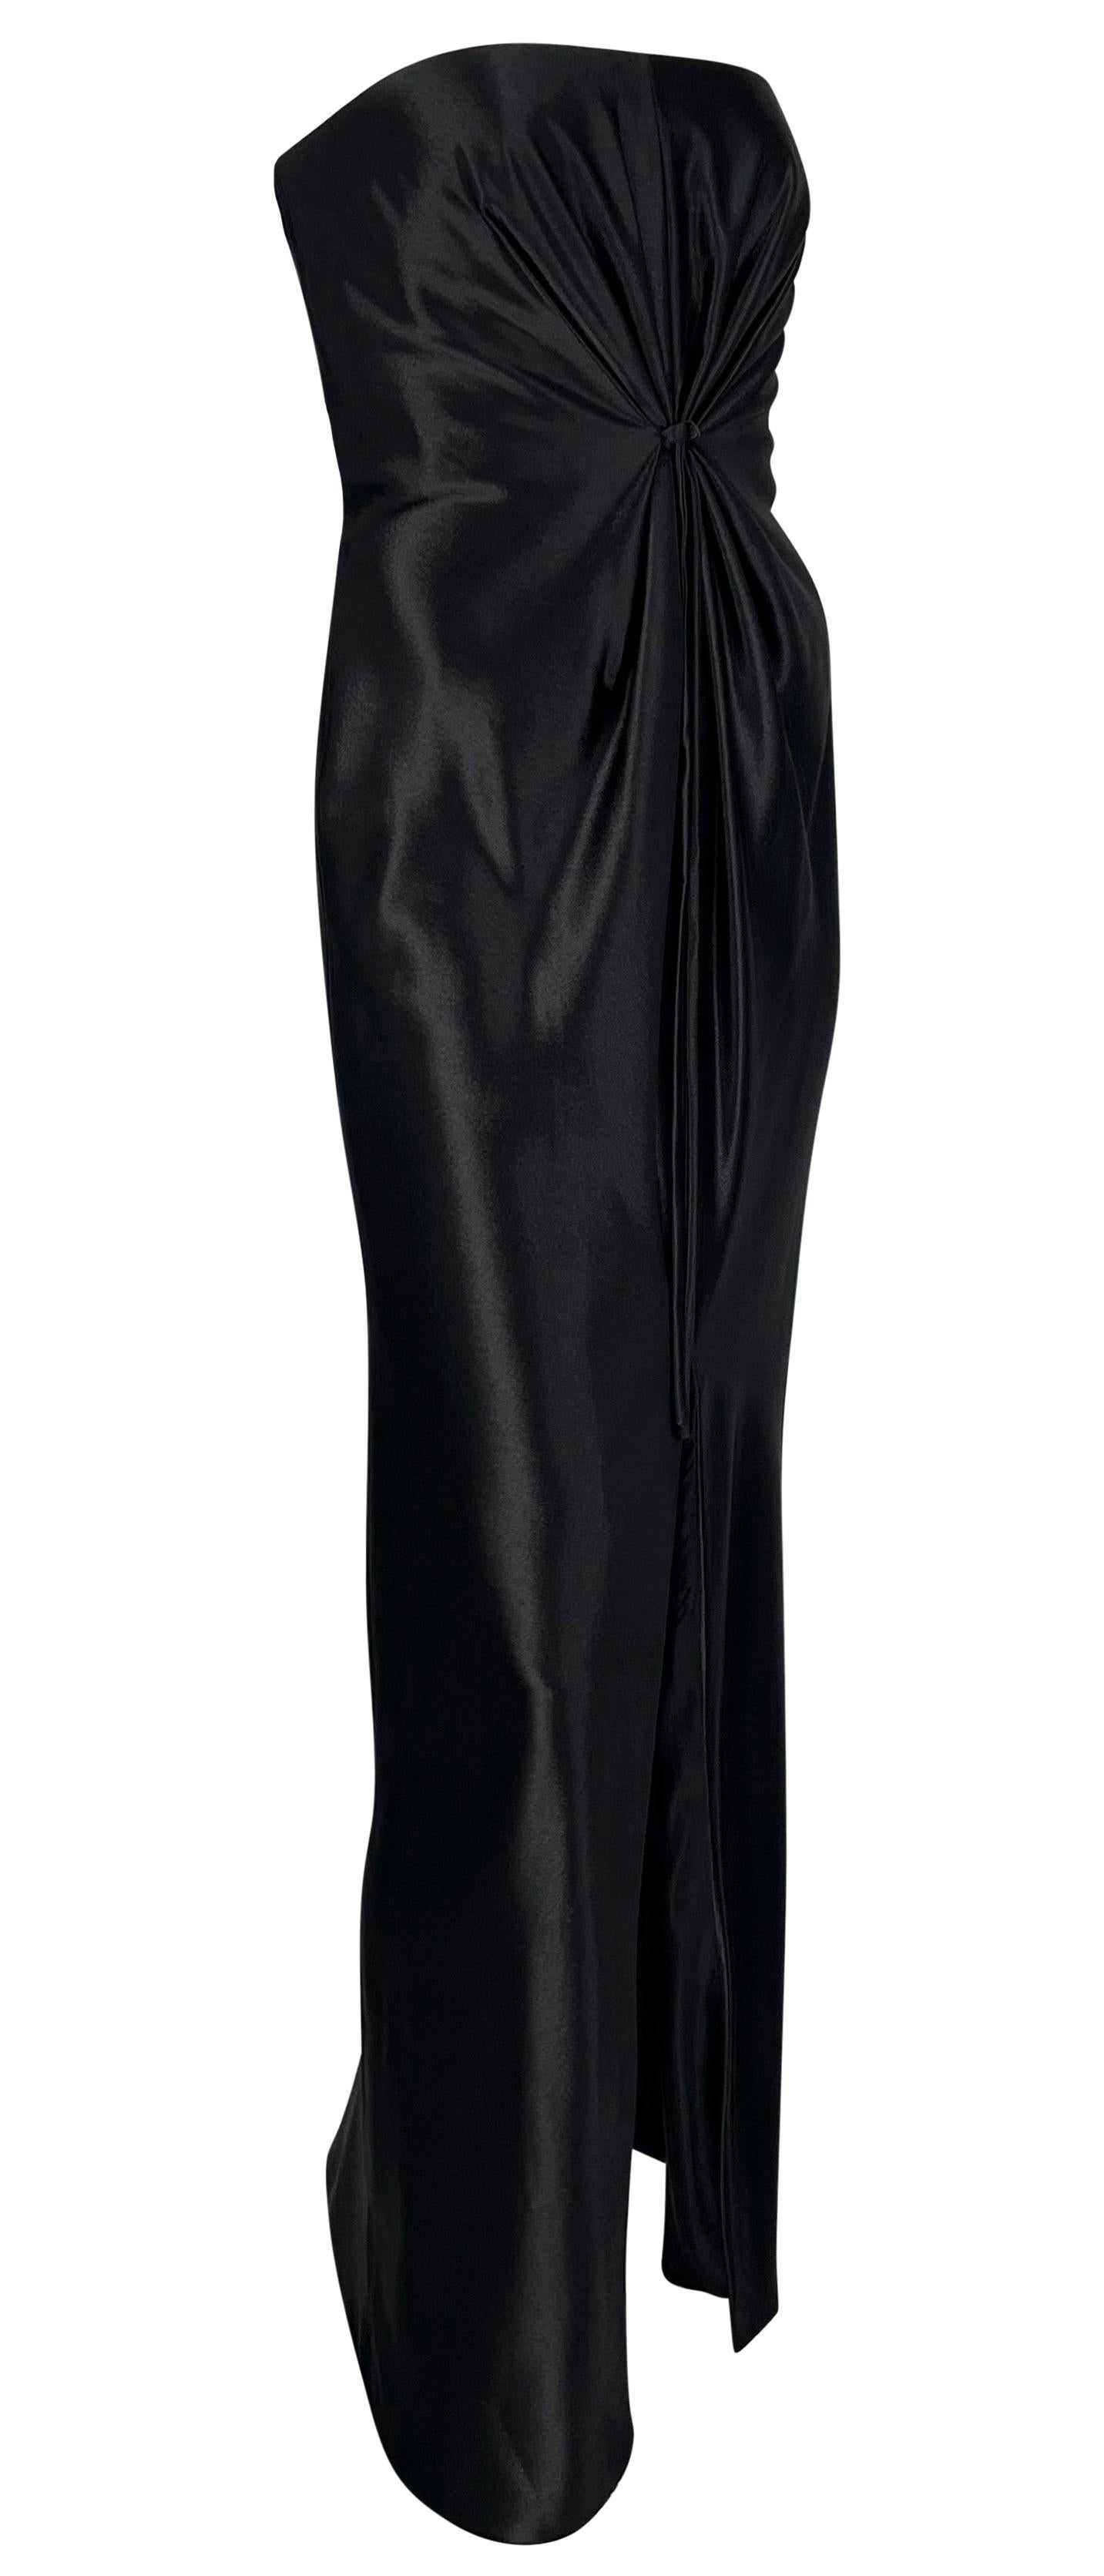 F/W 1997 Gianni Versace Strapless Satin Tie-Front Black Gown For Sale 6